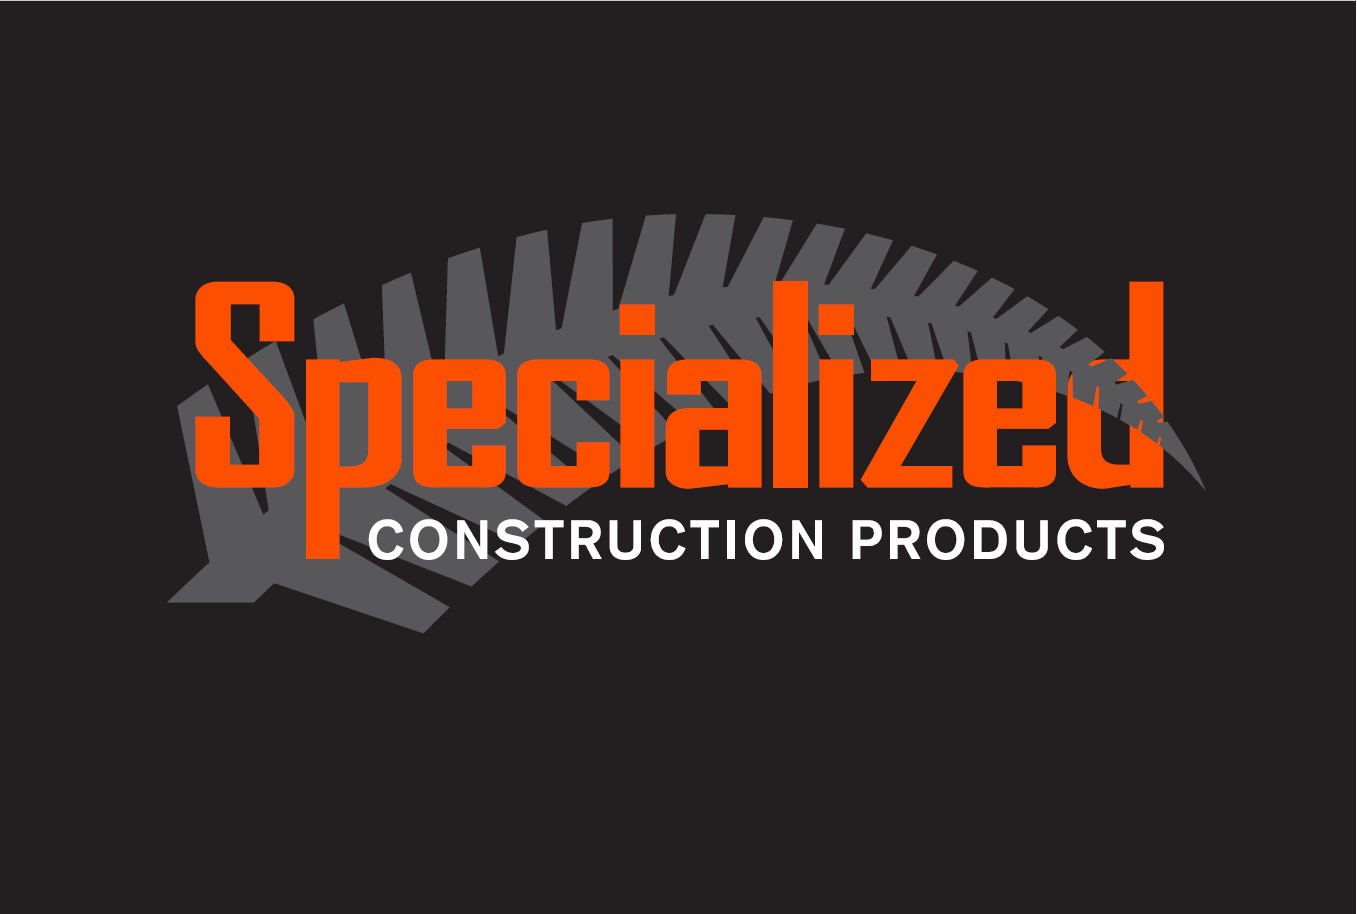 Construction Products